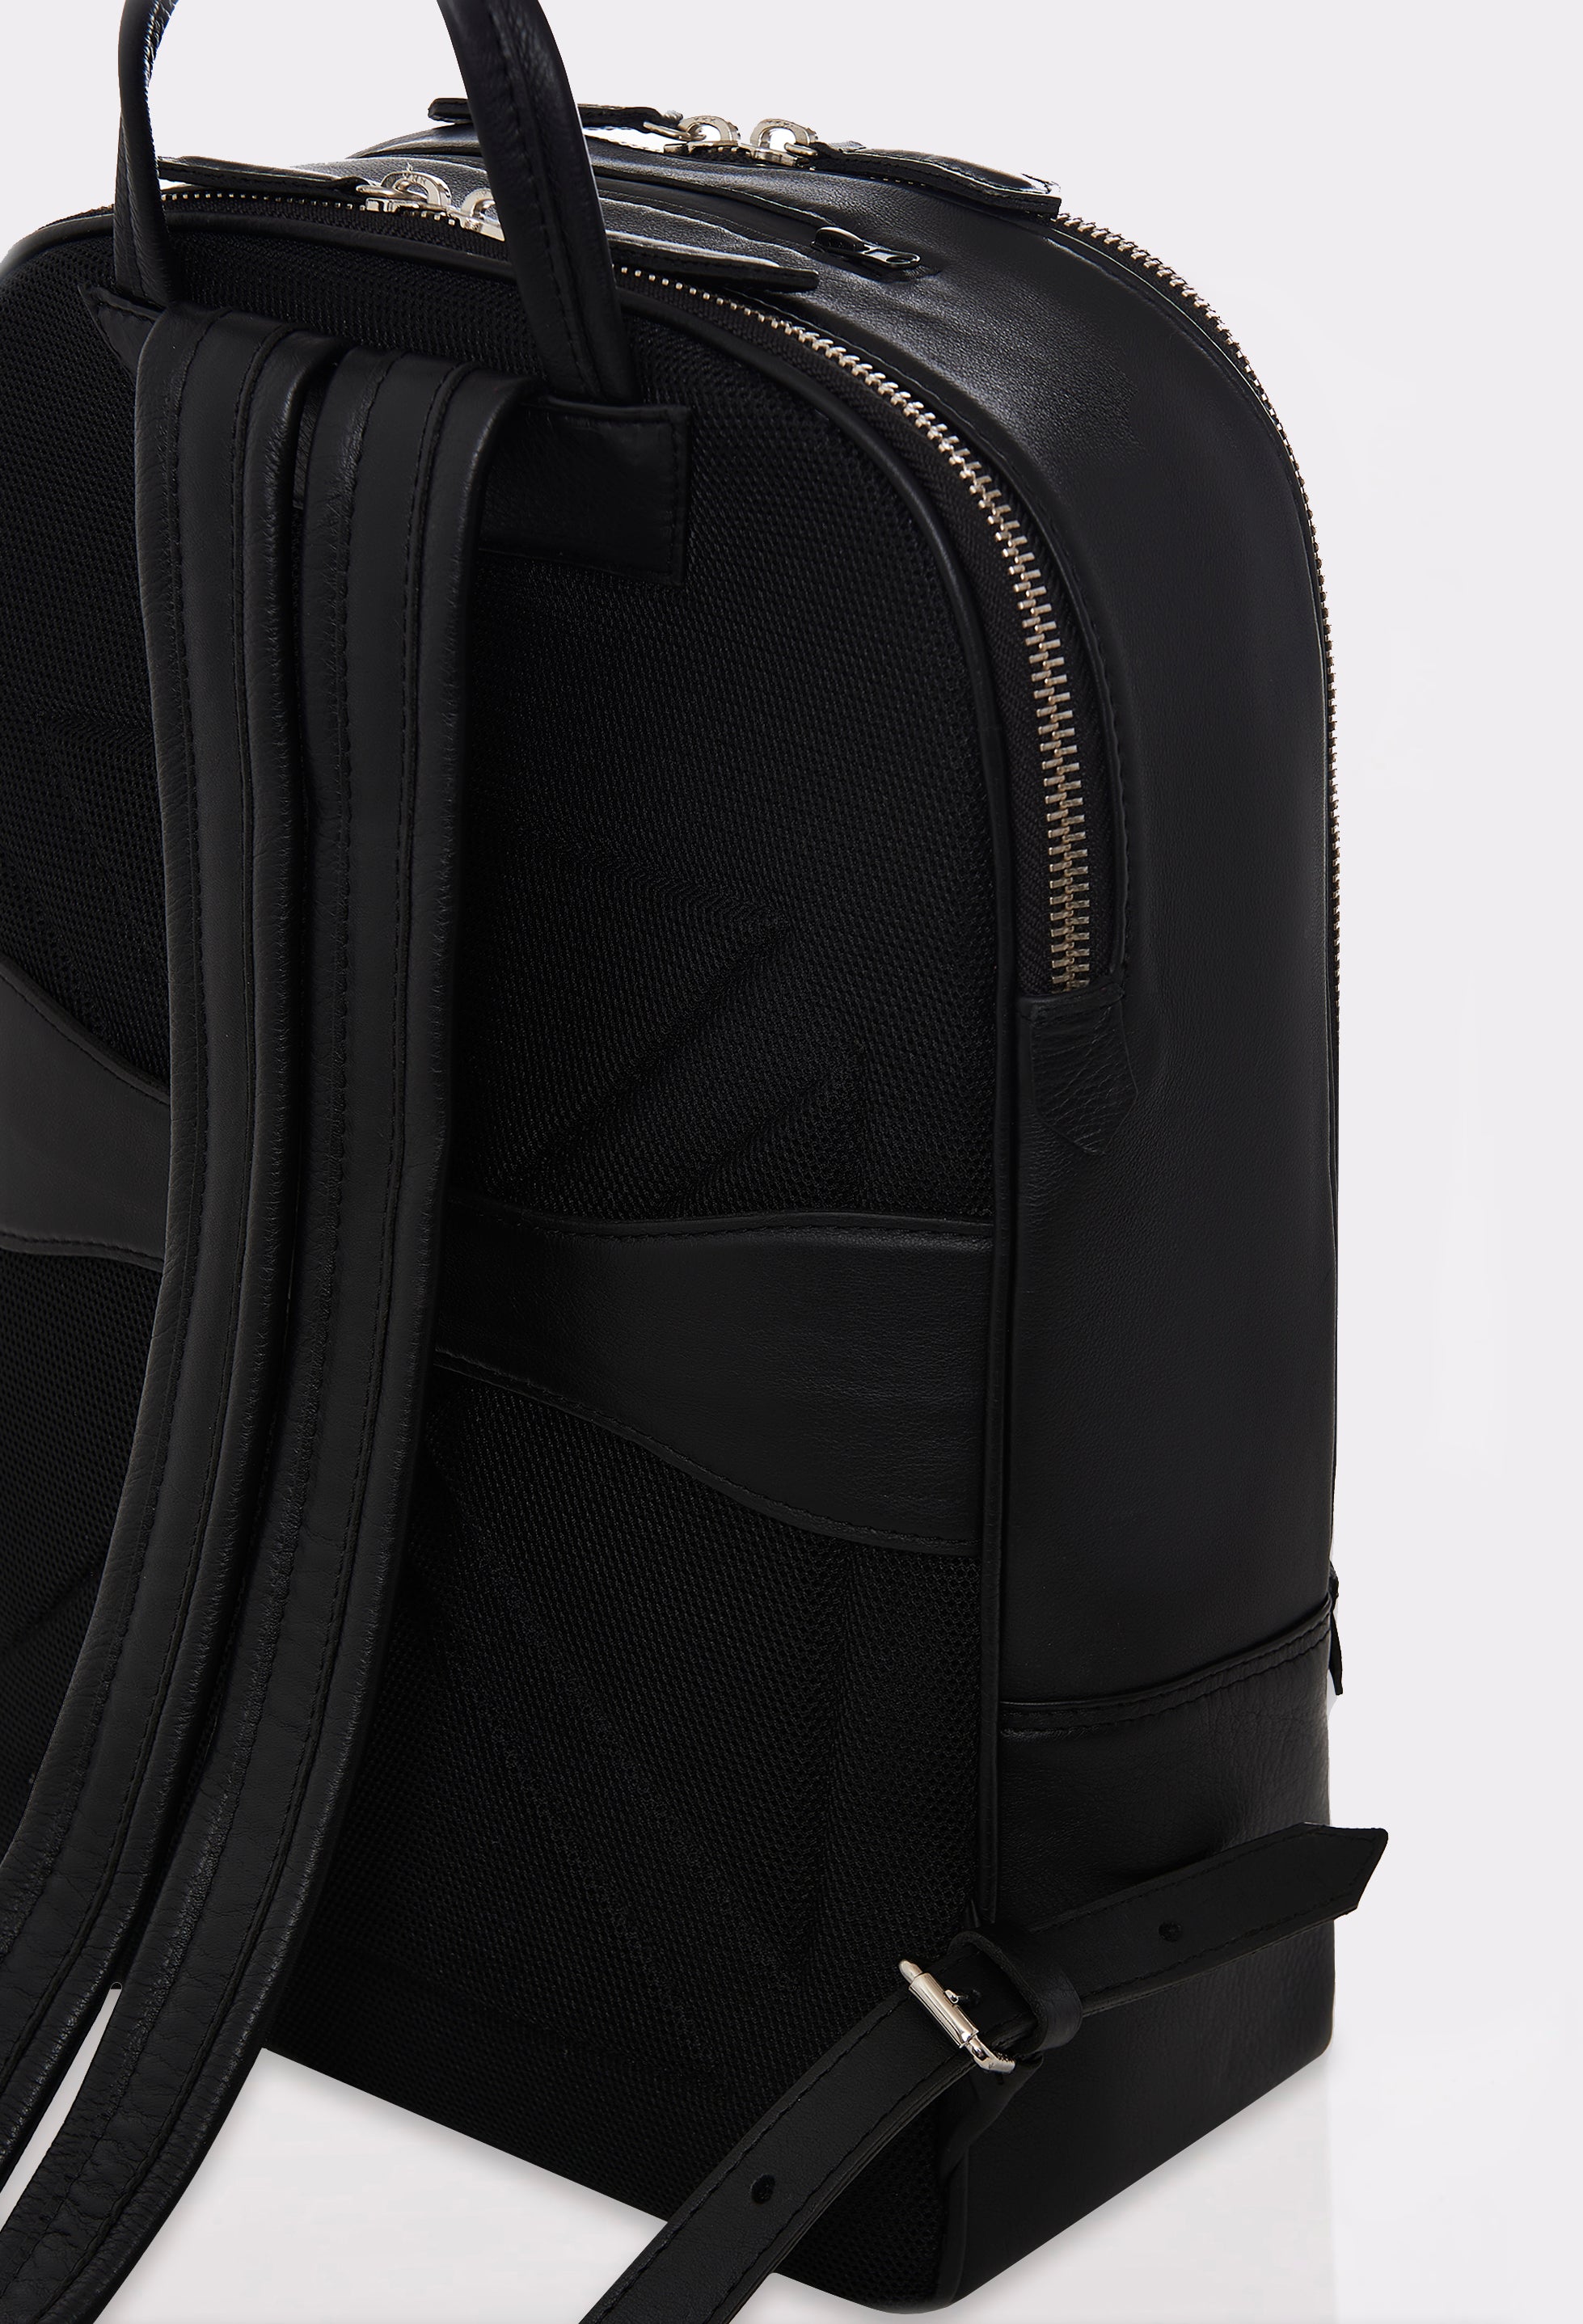 Partial photo of a Black Leather Backpack with two main compartments, an ergonomically shaped rear, made of durable textured mesh, with a leather integrated luggage holder and leather padded and adjustable straps.